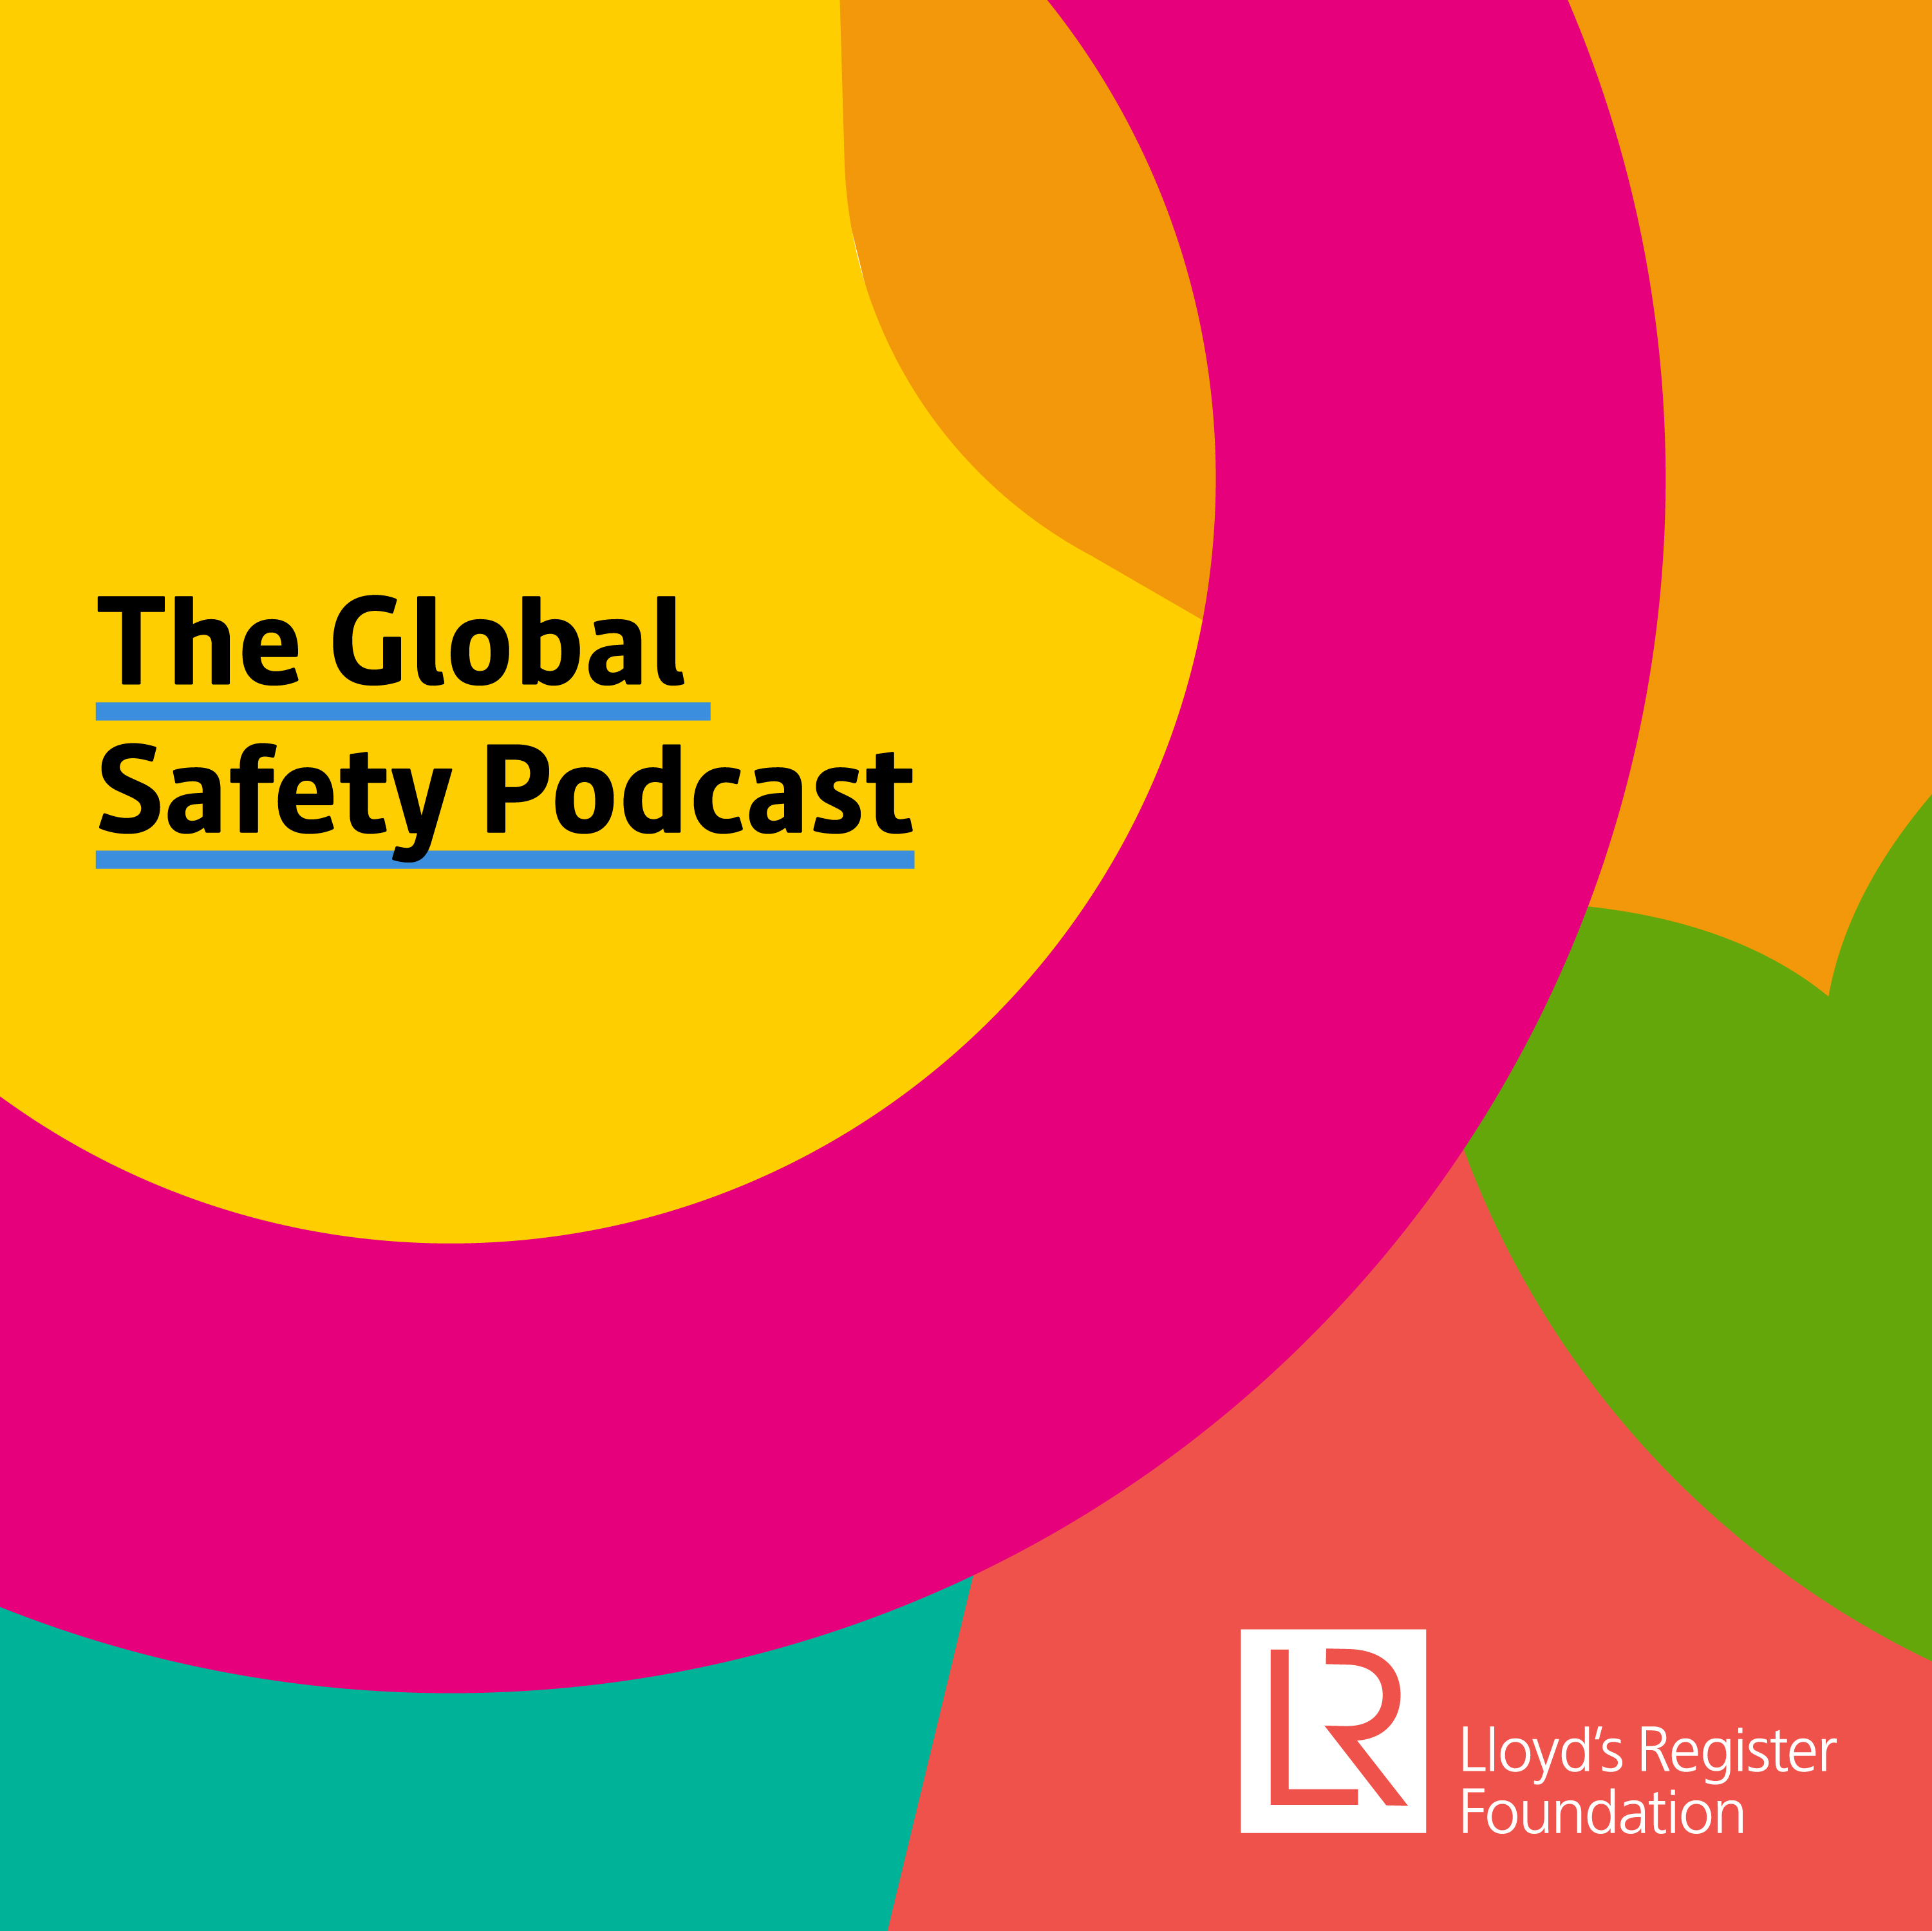 Changing listeners’ perspectives, with Lloyd’s Register Foundation